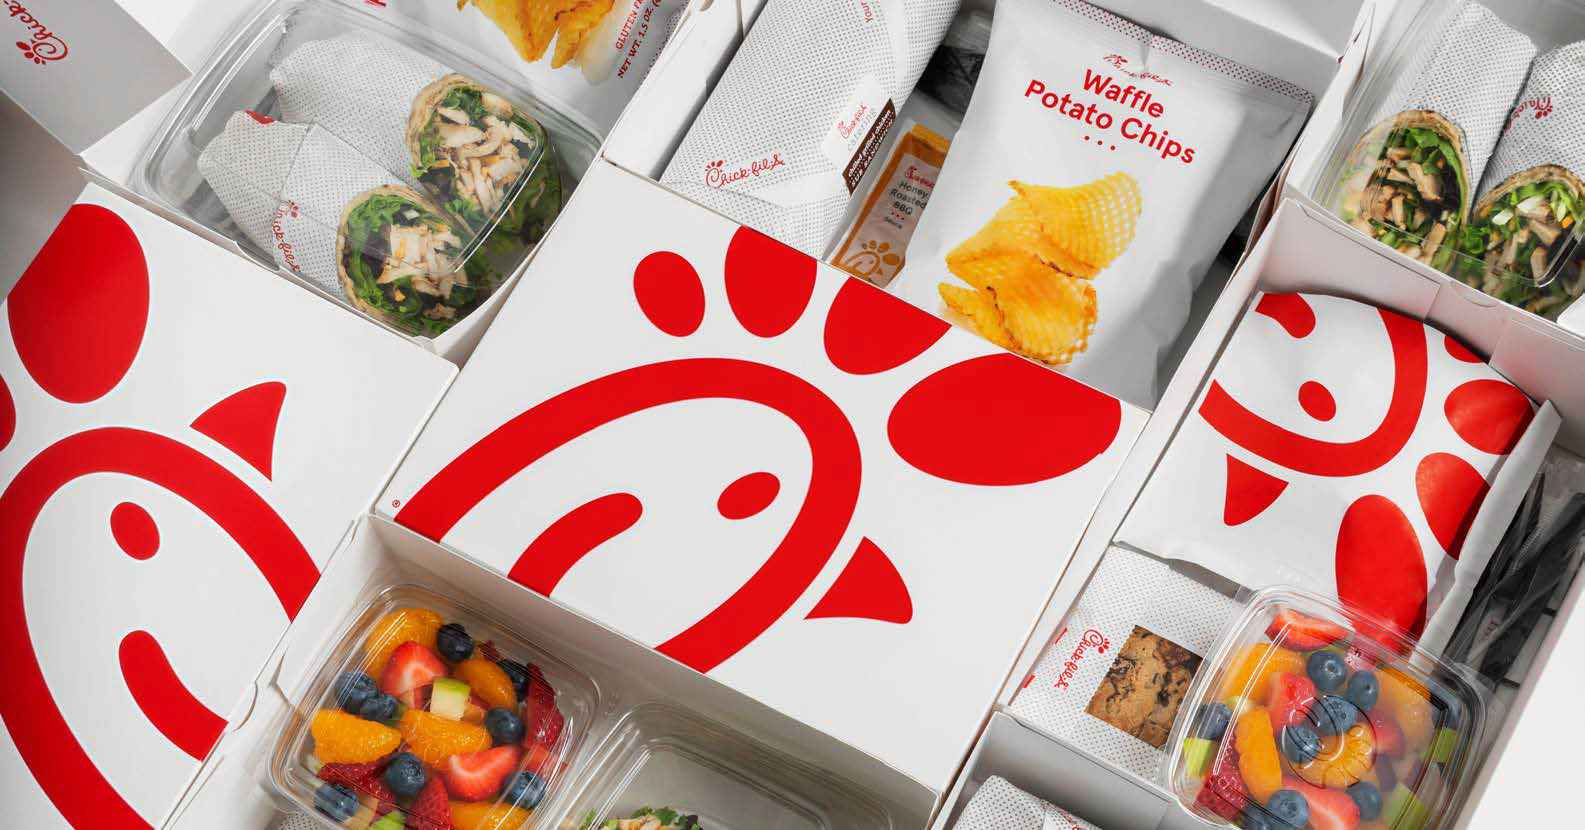 Everything you need to know about Catering ChickfilA